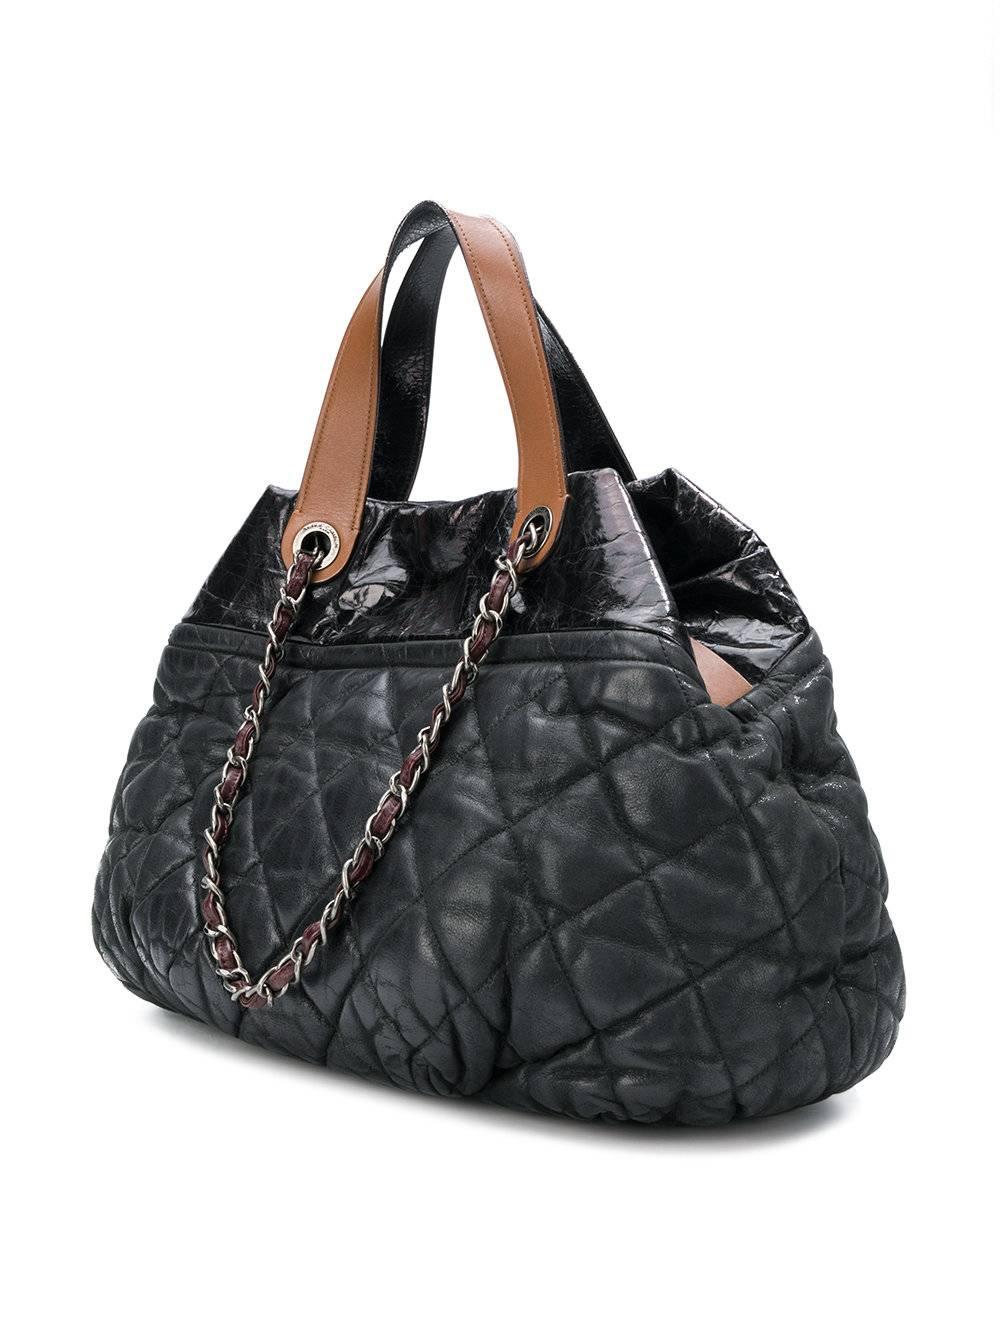 This Chanel Coco Cocoon tote bag showcases a spacious, lightweight gunmetal grey fabric with a quilted finish. It opens to reveal a roomy burgundy interior with two open slip pockets, one larger zipped pocket and fob for your keys, perfect for all